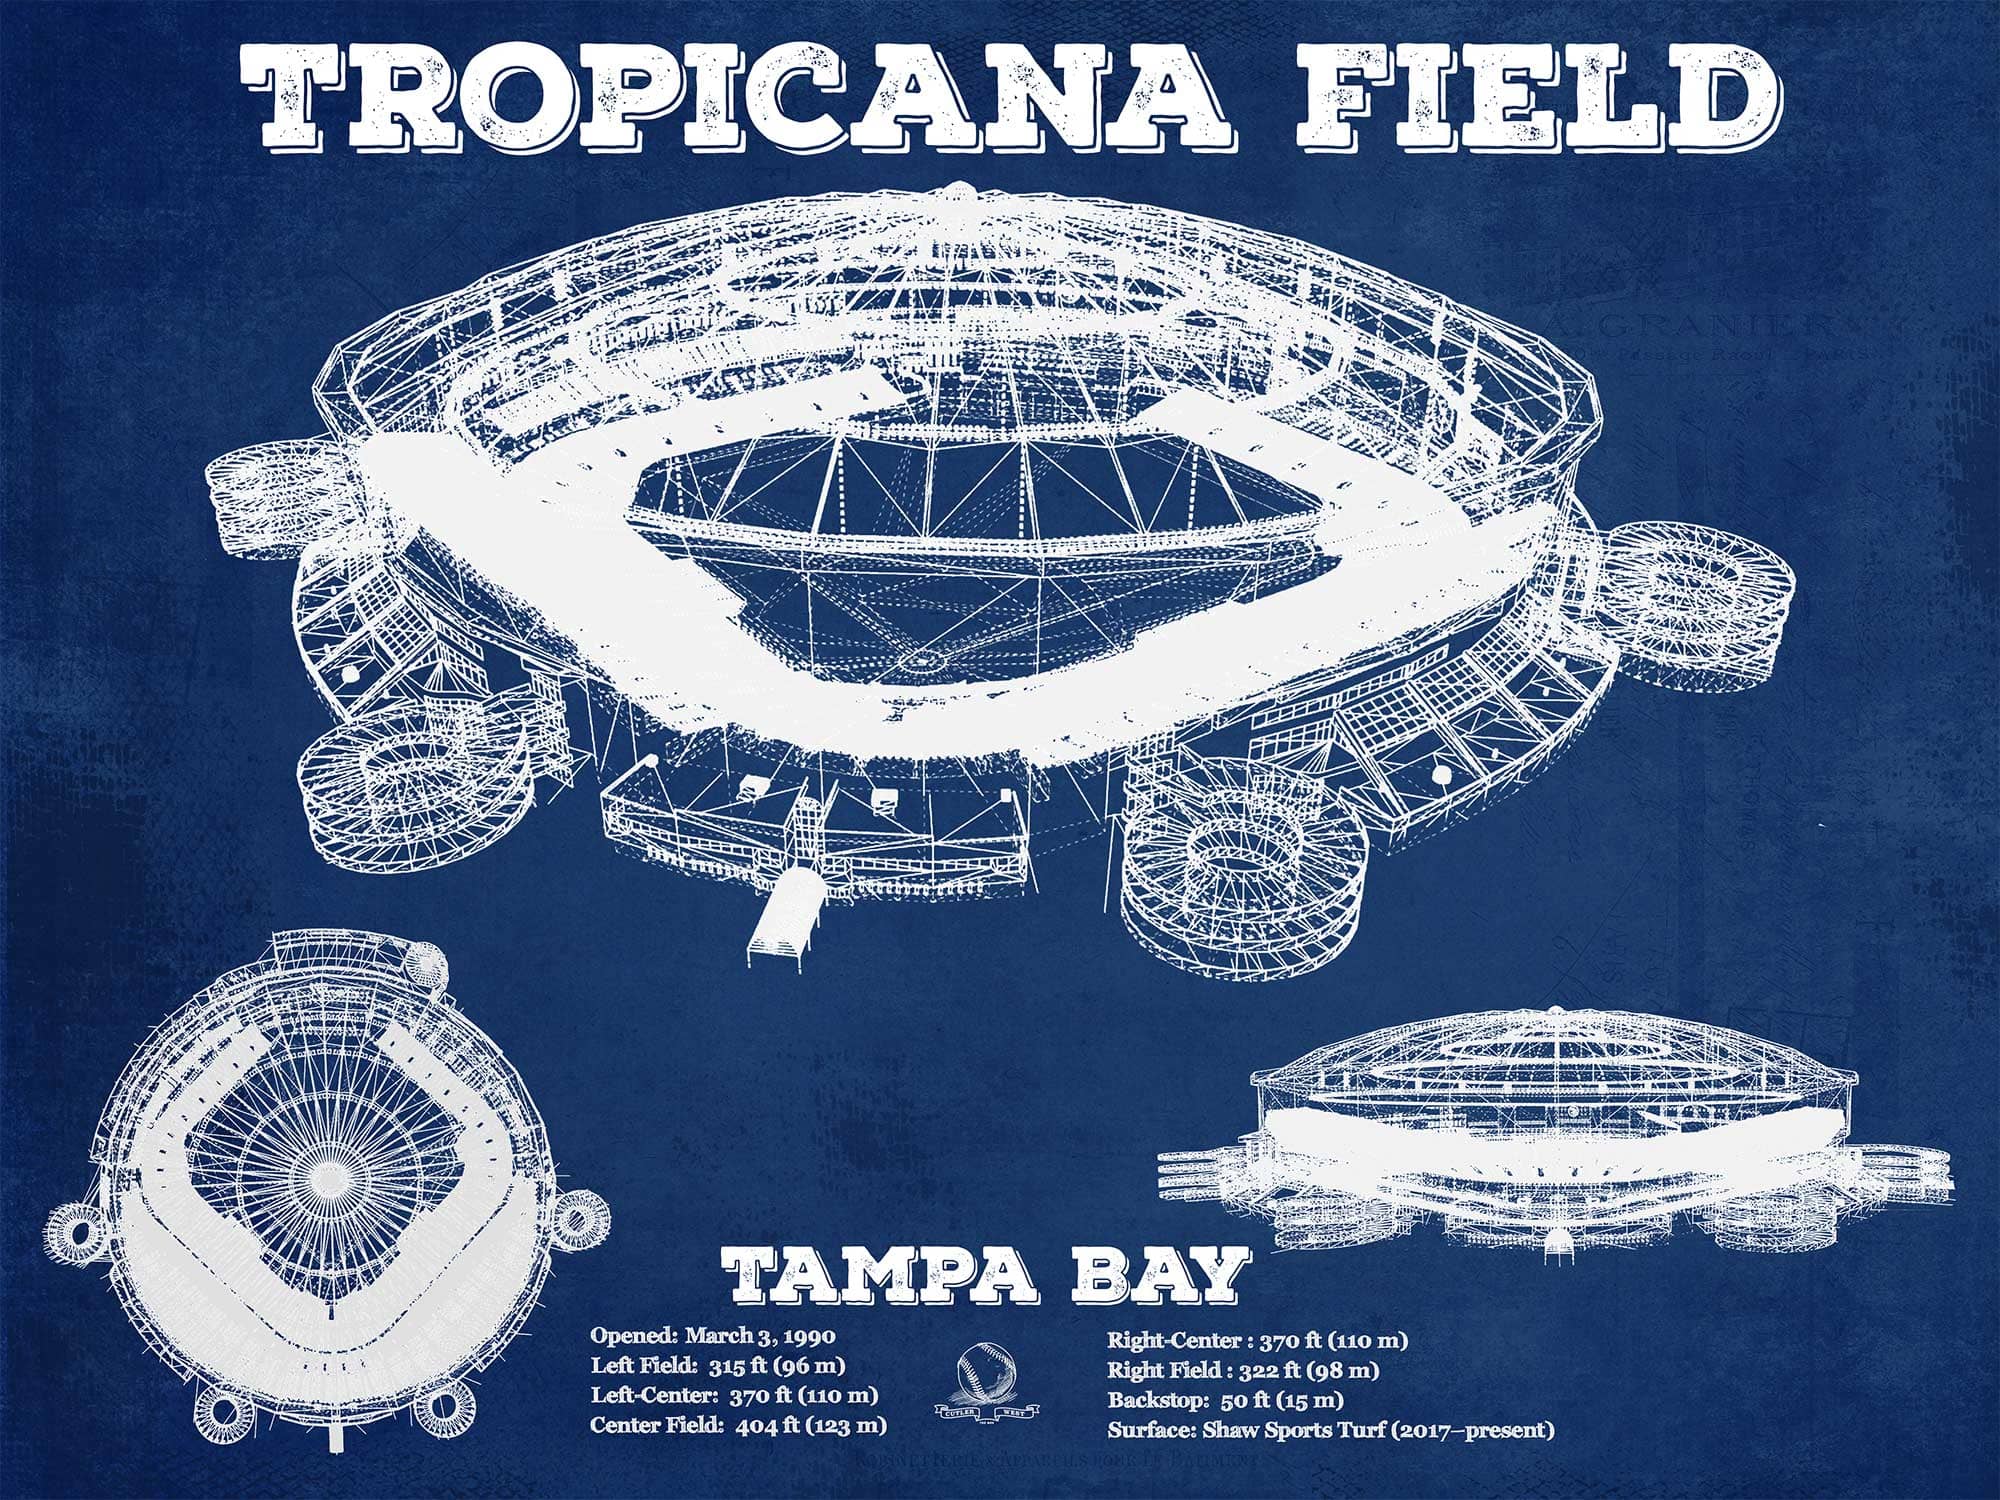 Cutler West Baseball Collection 14" x 11" / Unframed Tampa Bay Rays Tropicana Field Vintage Wall Art 845000154_8839